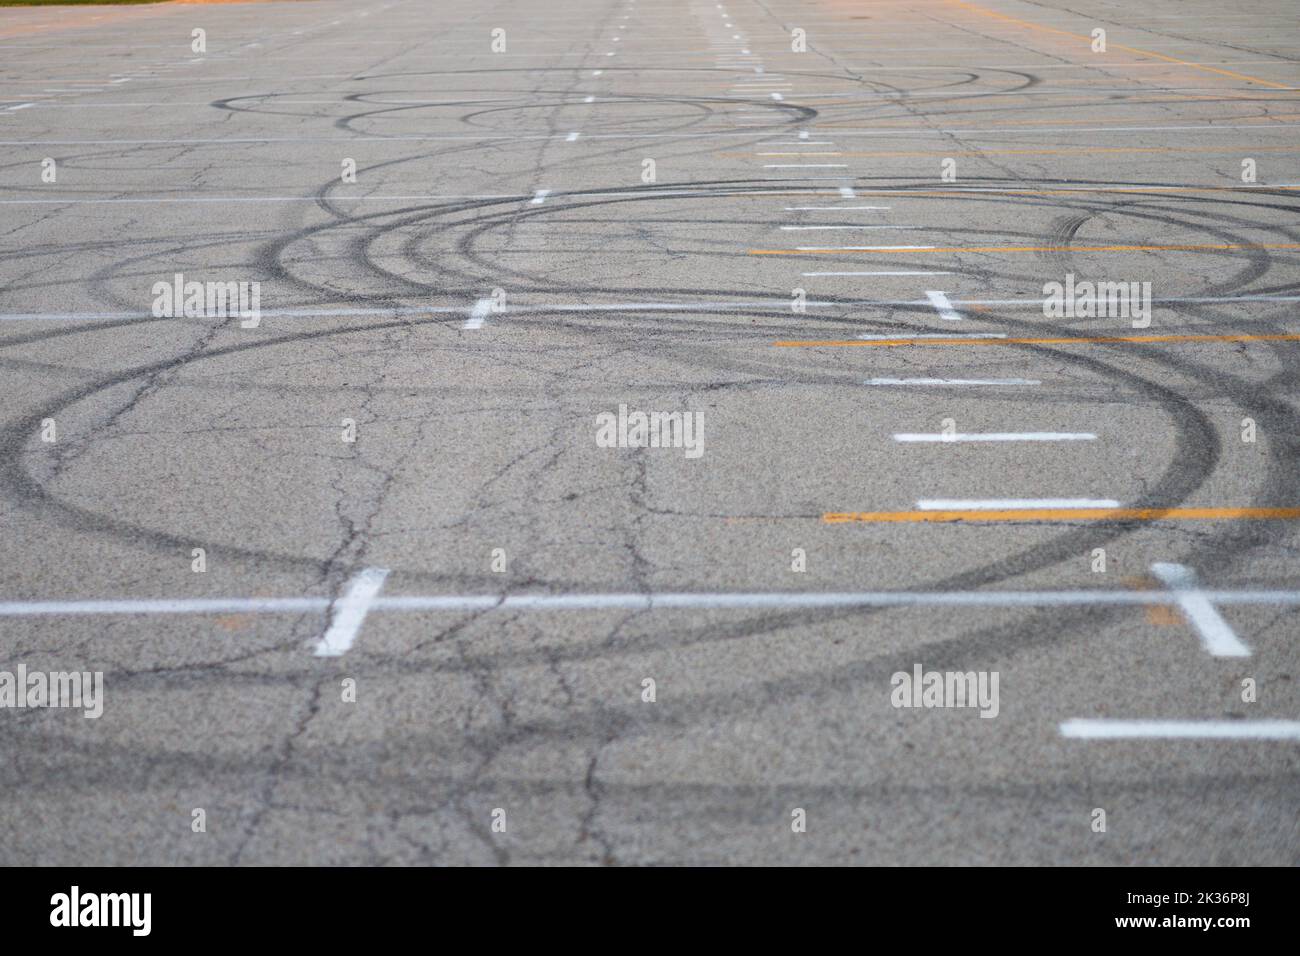 circular car tracks in the middle of a parking lot Stock Photo